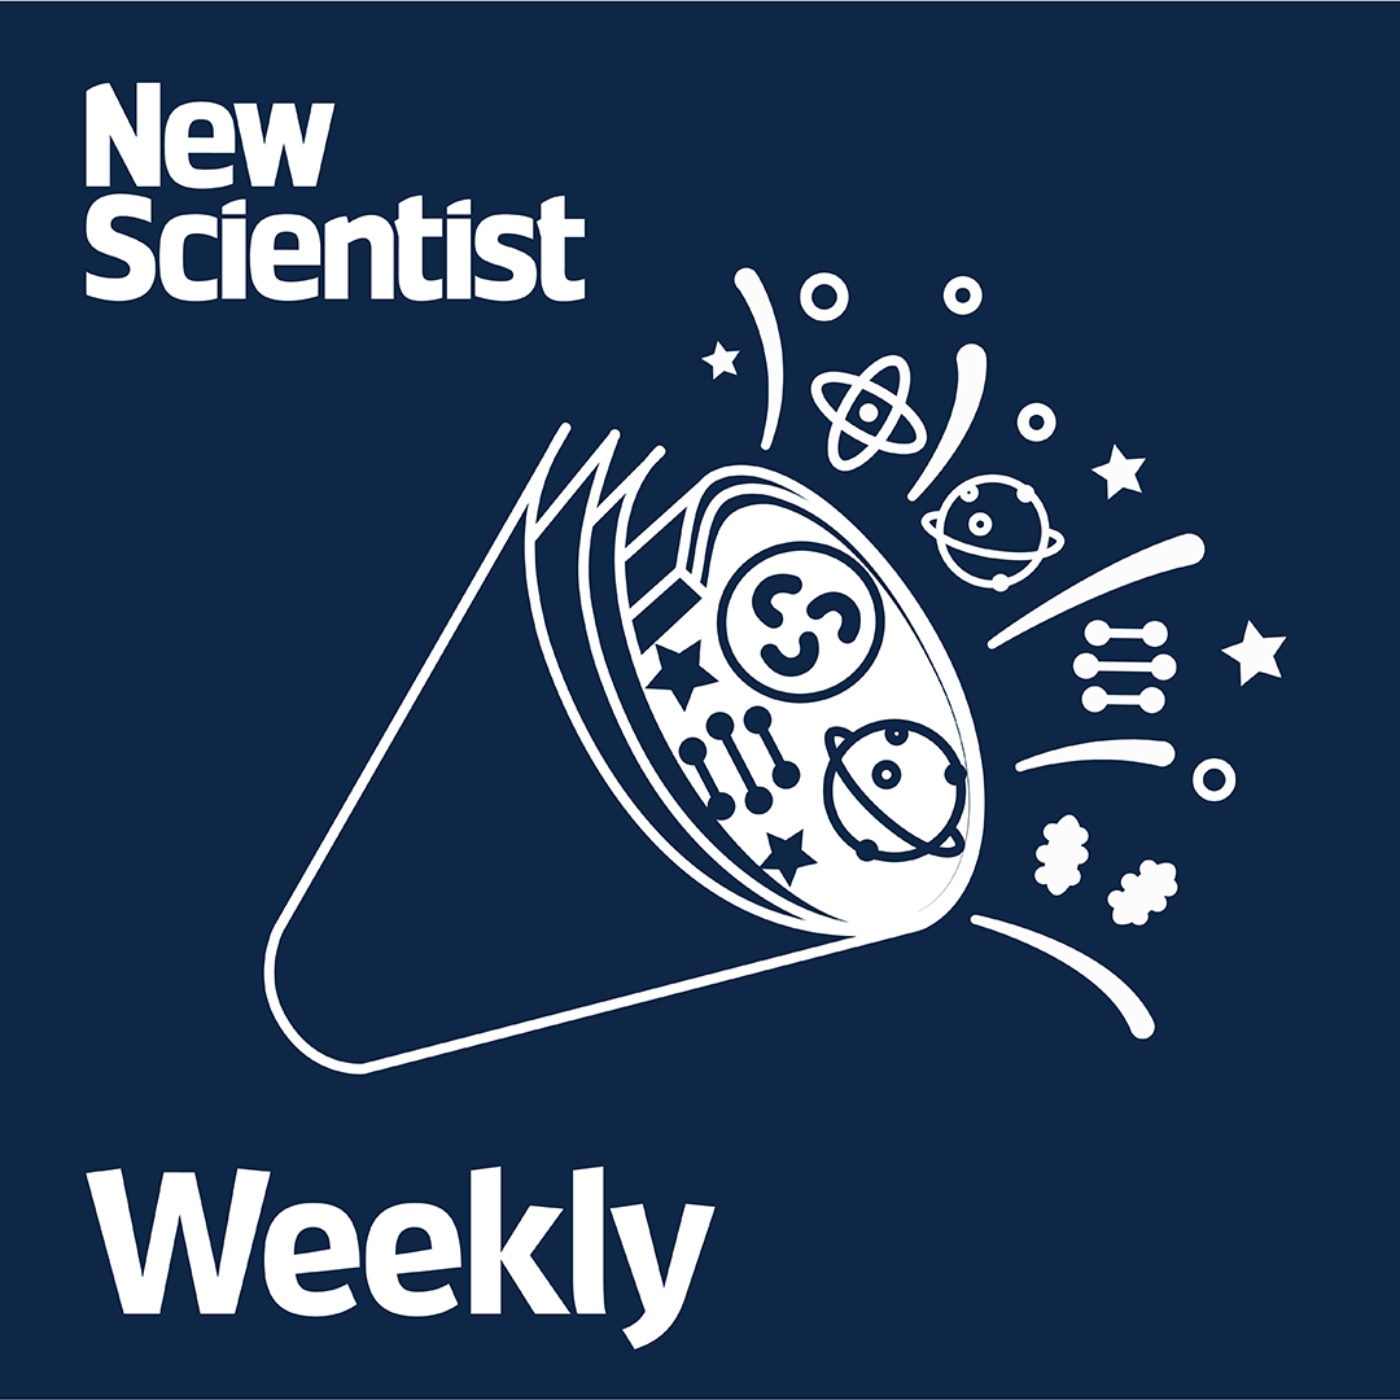 Weekly: Immune system treatment makes old mice seem young again; new black hole image; unexploded bombs are becoming more dangerous